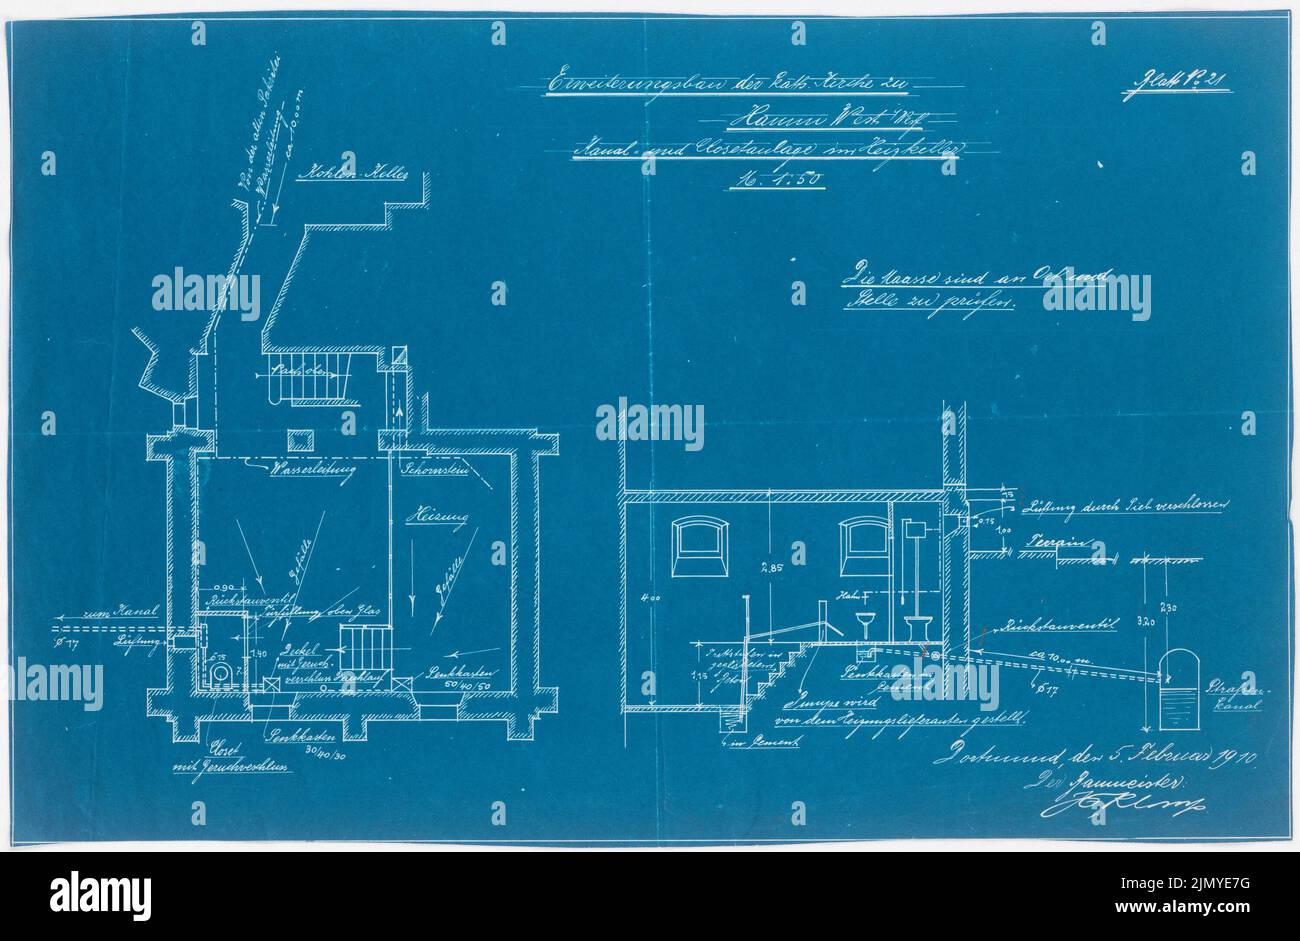 Klomp Johannes Franziskus (1865-1946), expansion of the St. Joseph Church, Hamm (05.02.1910): Canal and toilet facility in the heating cellar, floor plan and average 1:50. Blueprint on paper, 31.4 x 47.9 cm (including scan edges) Stock Photo